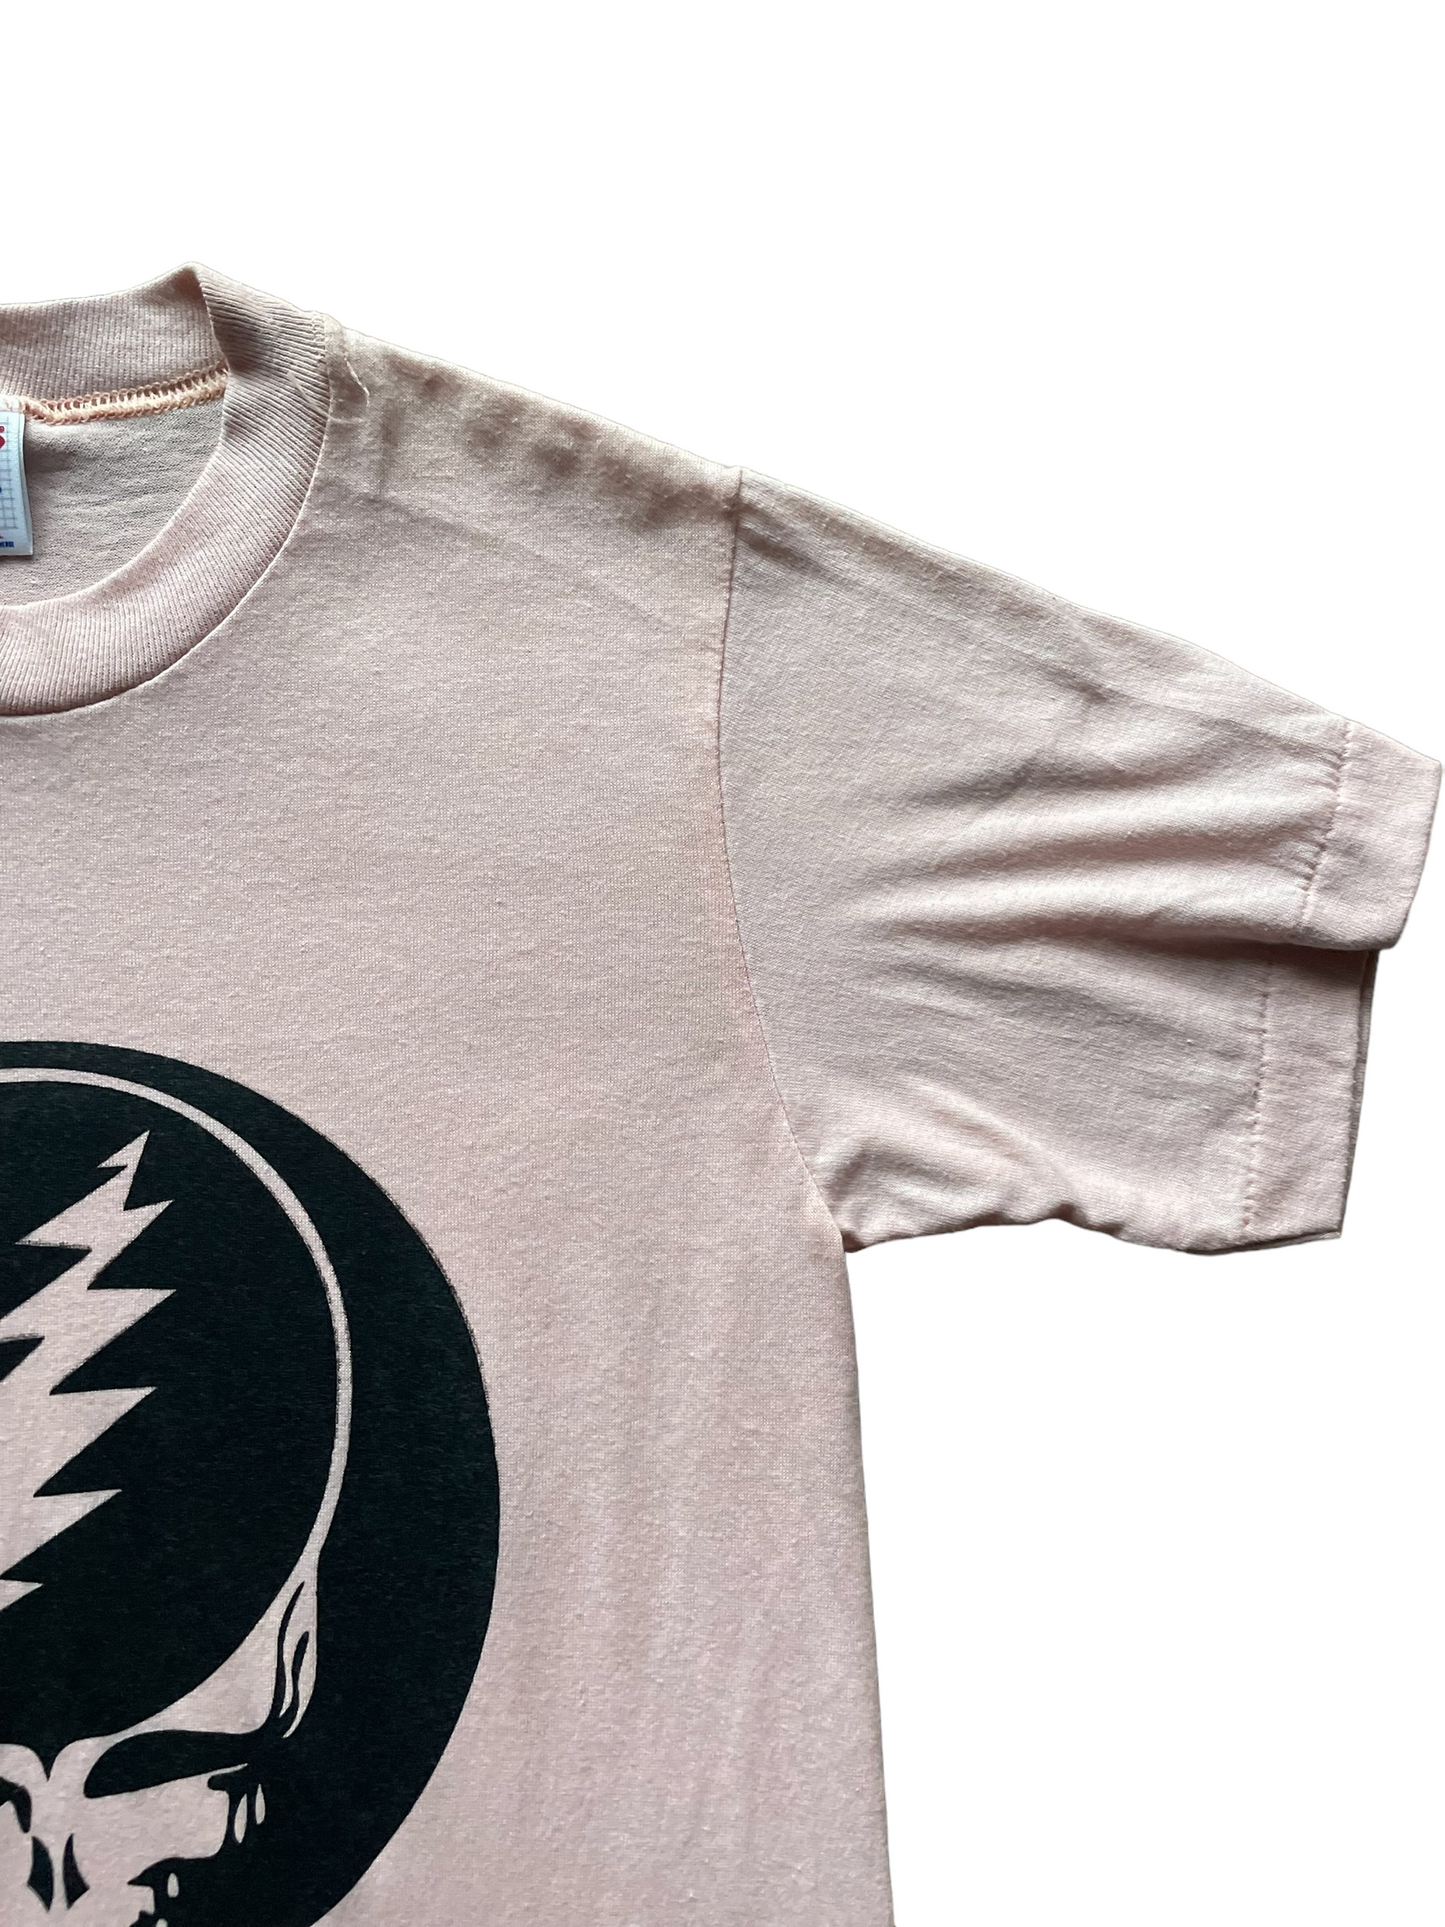 Right Single Stitch Sleeve View on Vintage Pink Grateful Dead Steal Your Face Parking Lot Boot TShirt SZ S |  Vintage Grateful Dead Tee Seattle | Barn Owl Vintage